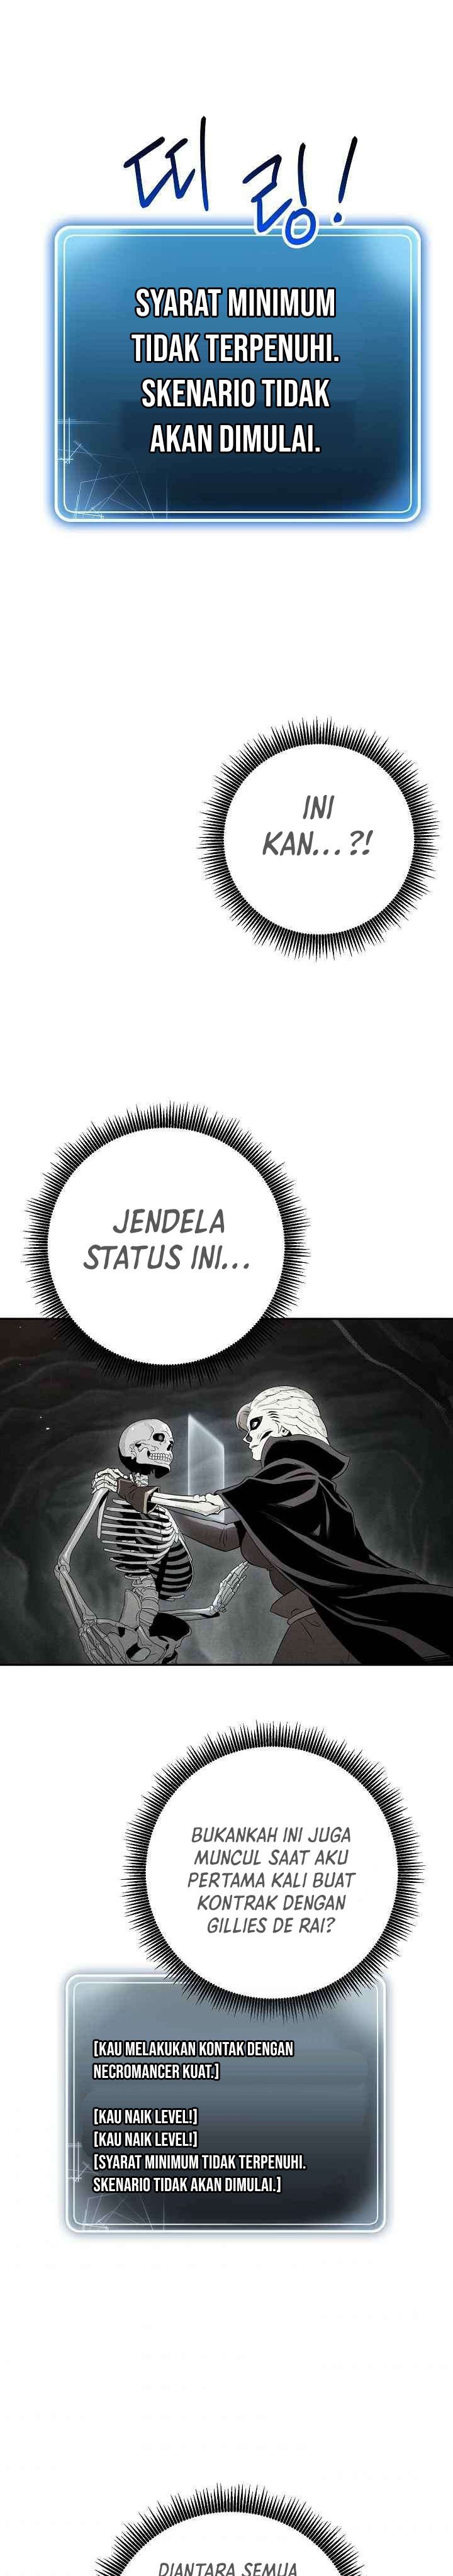 Skeleton Soldier Couldn’t Protect the Dungeon Chapter 130